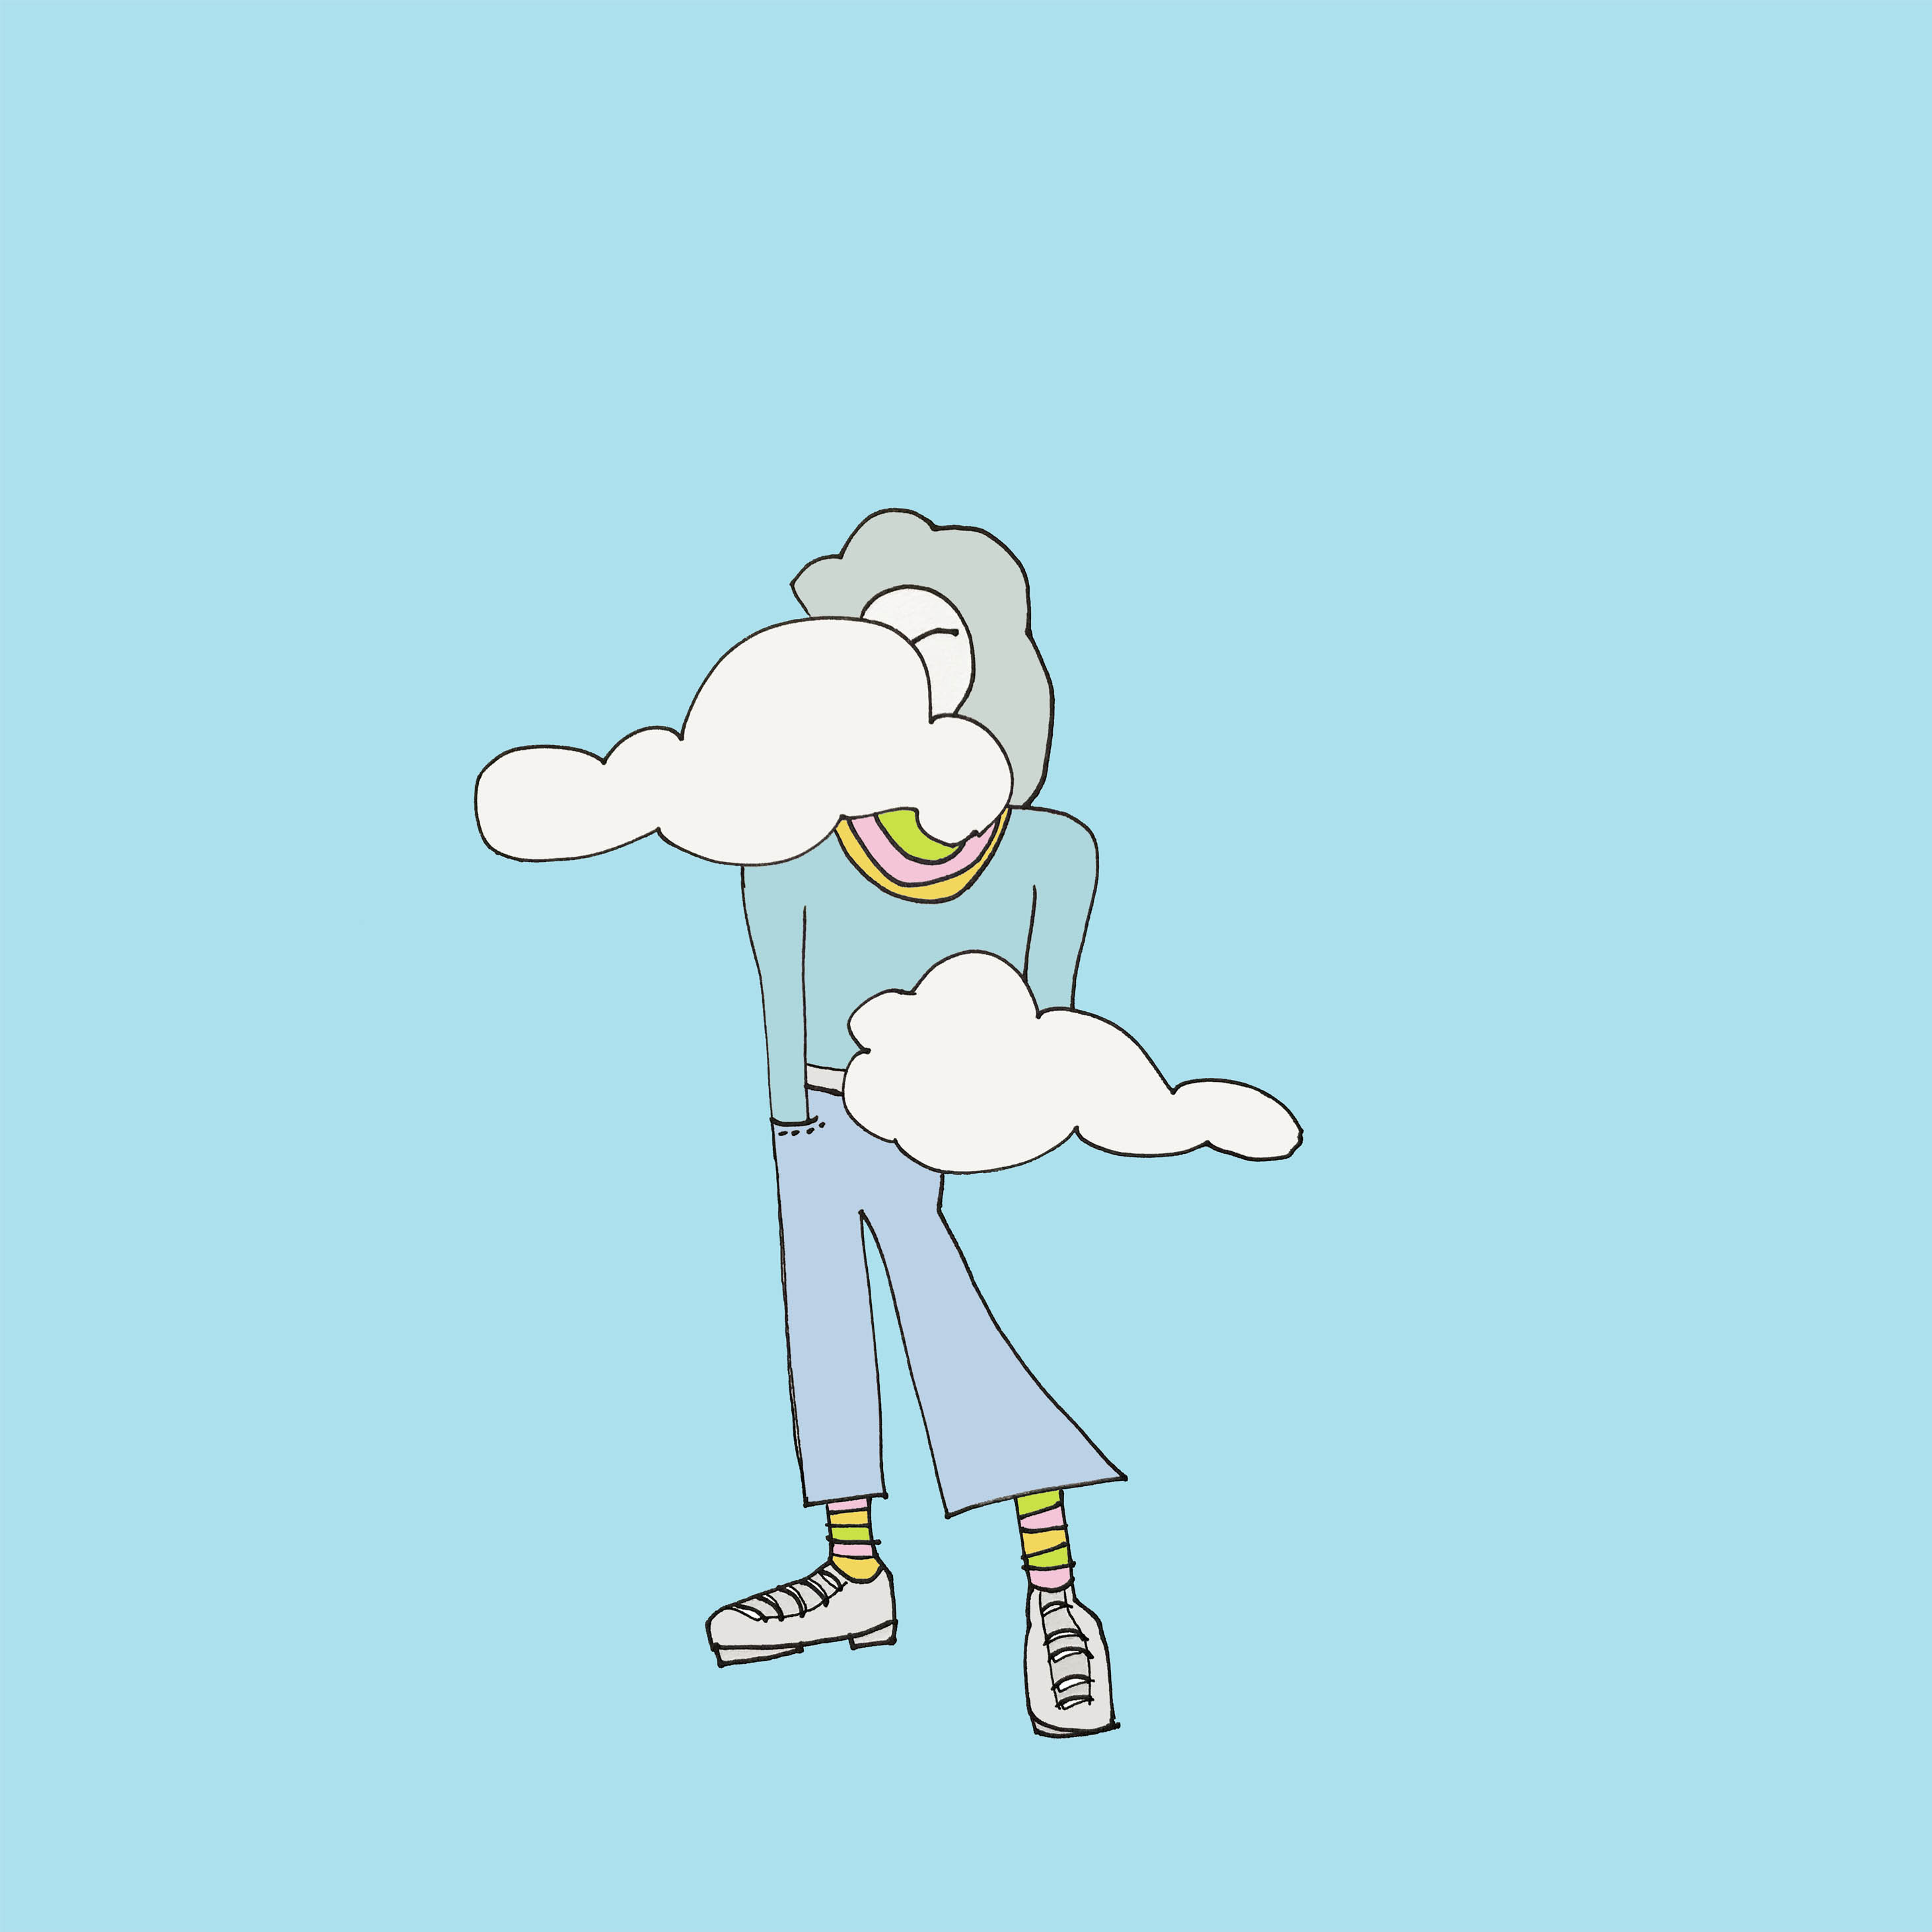 art every day number 225 / illustration / clouds